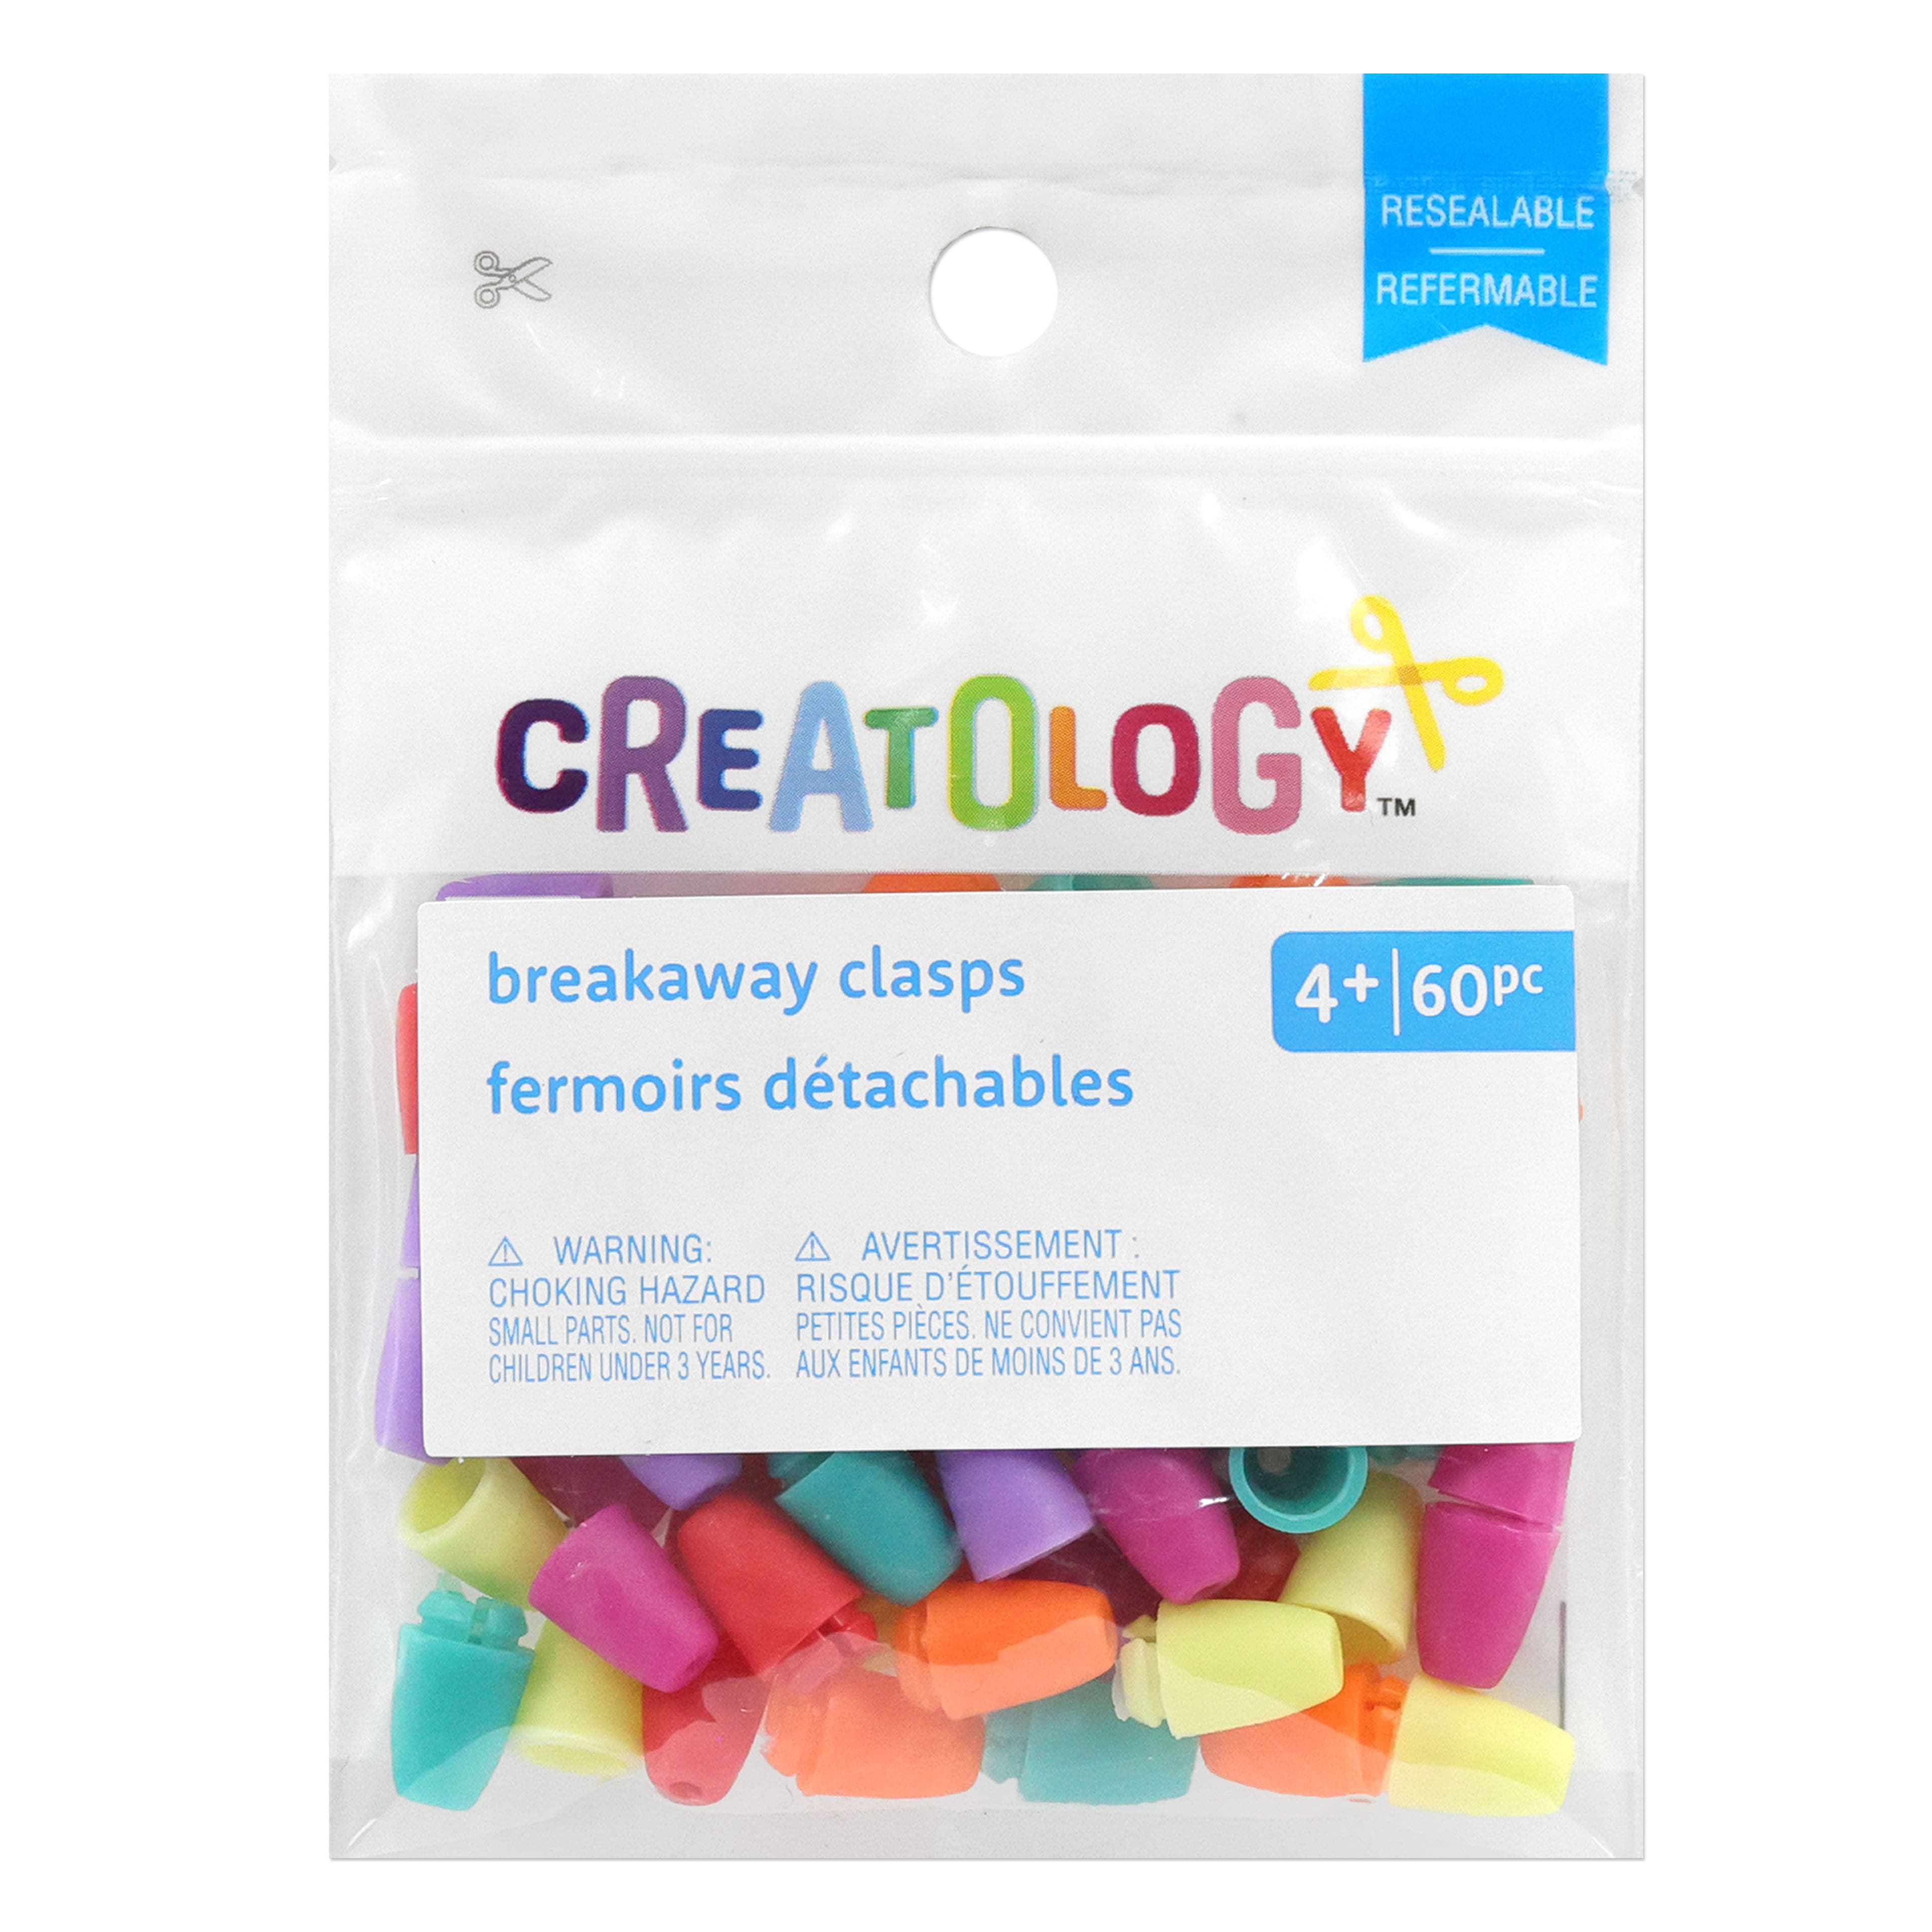 12 Packs: 30 ct. (360 total) Breakaway Clasps by Creatology&#x2122;